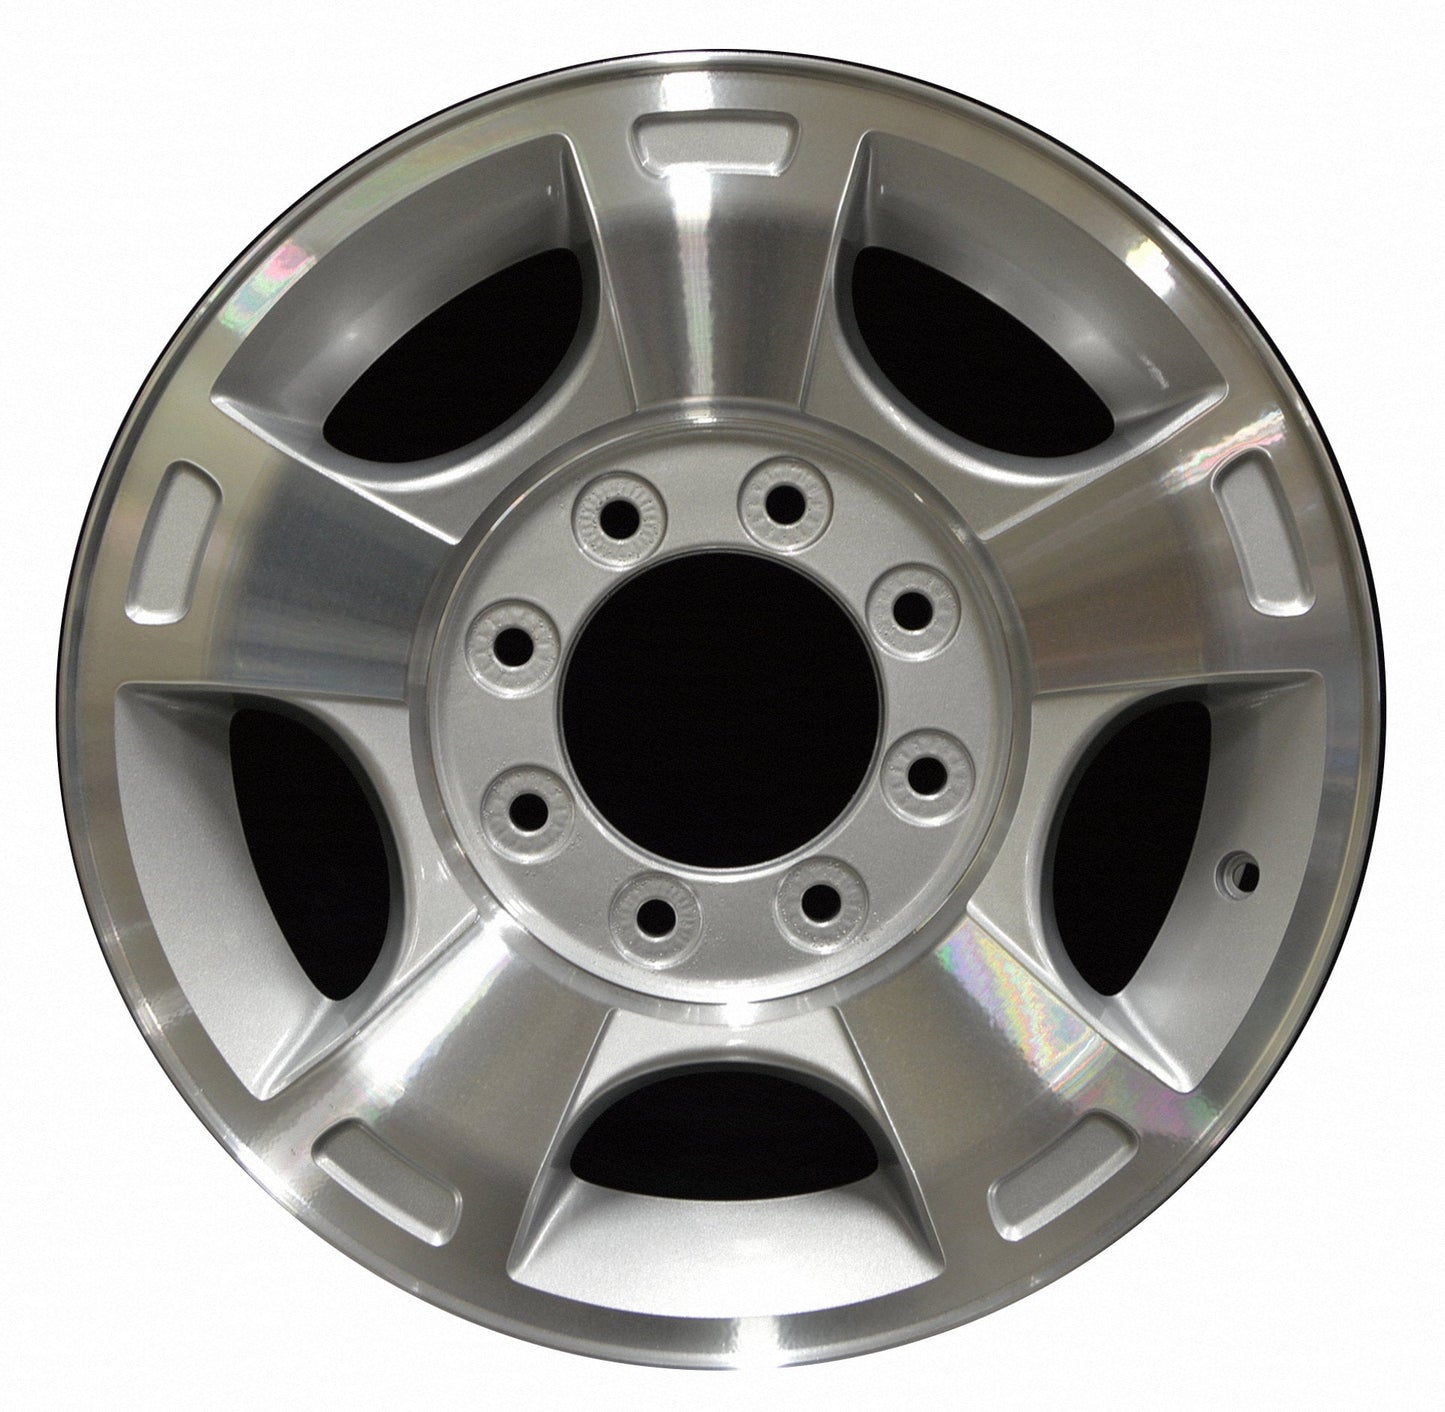 Ford F250 F350 Truck  2009, 2010, 2011, 2012, 2013, 2014, 2015, 2016 Factory OEM Car Wheel Size 18x8 Alloy WAO.3790.PS02.MA